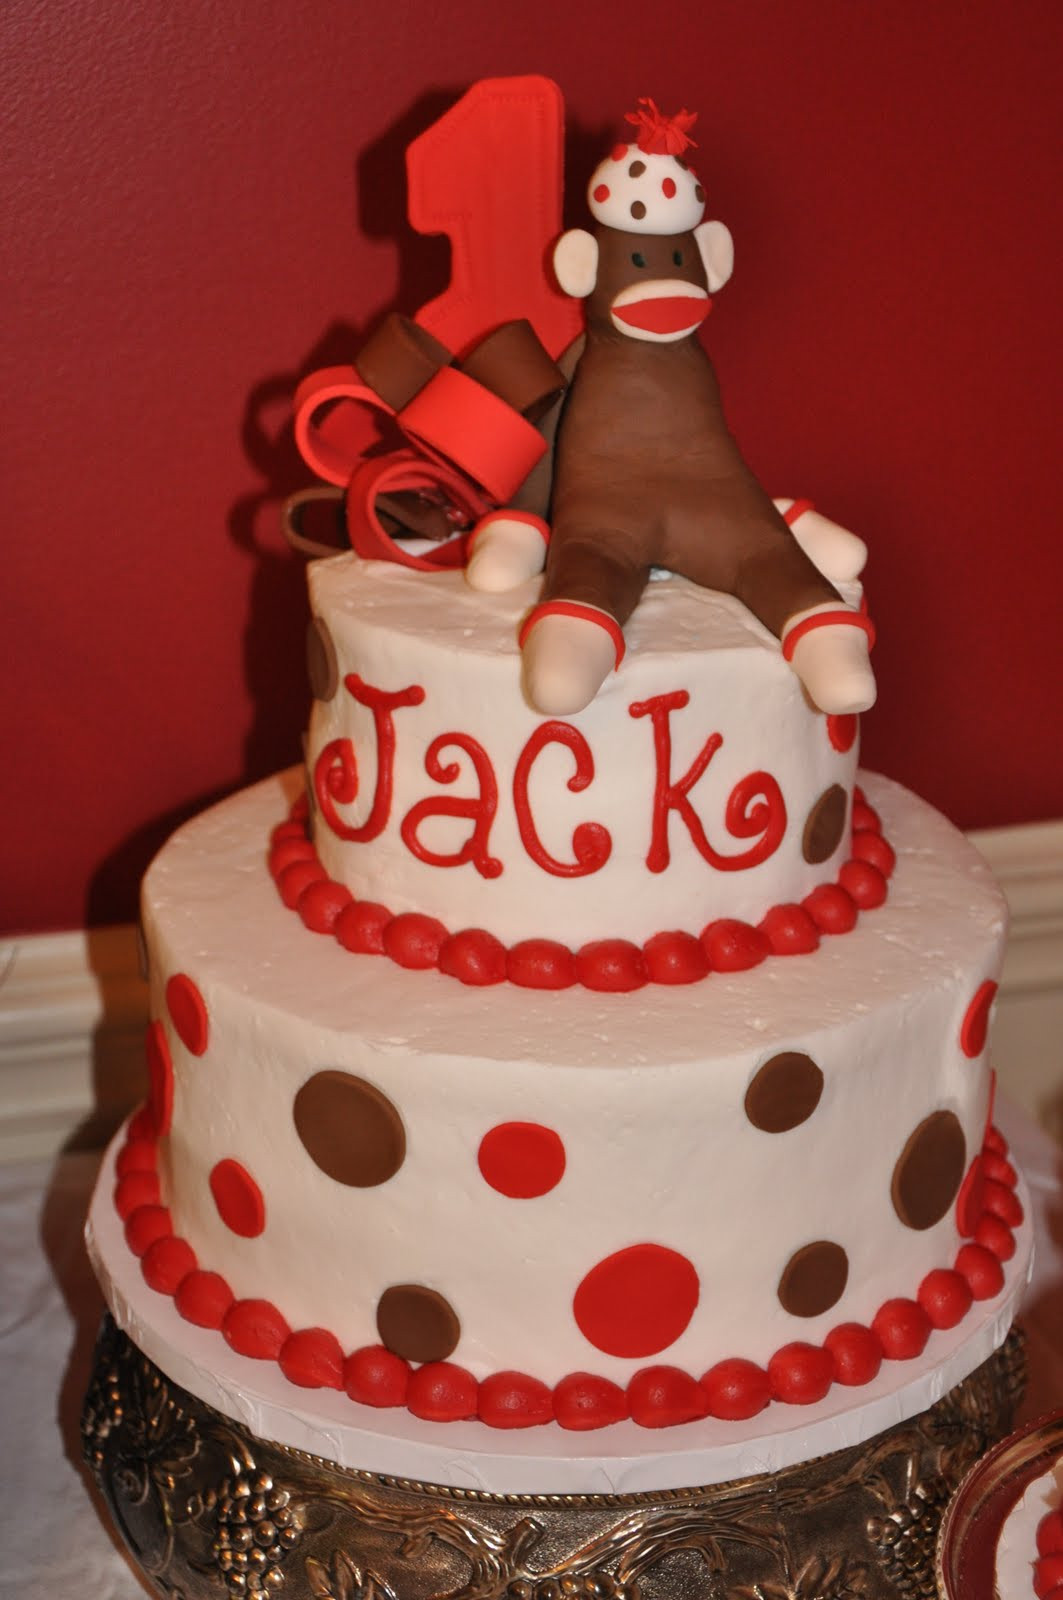 Sock Monkey Birthday Cake
 Long Party of Five A Sock Monkey Birthday Party